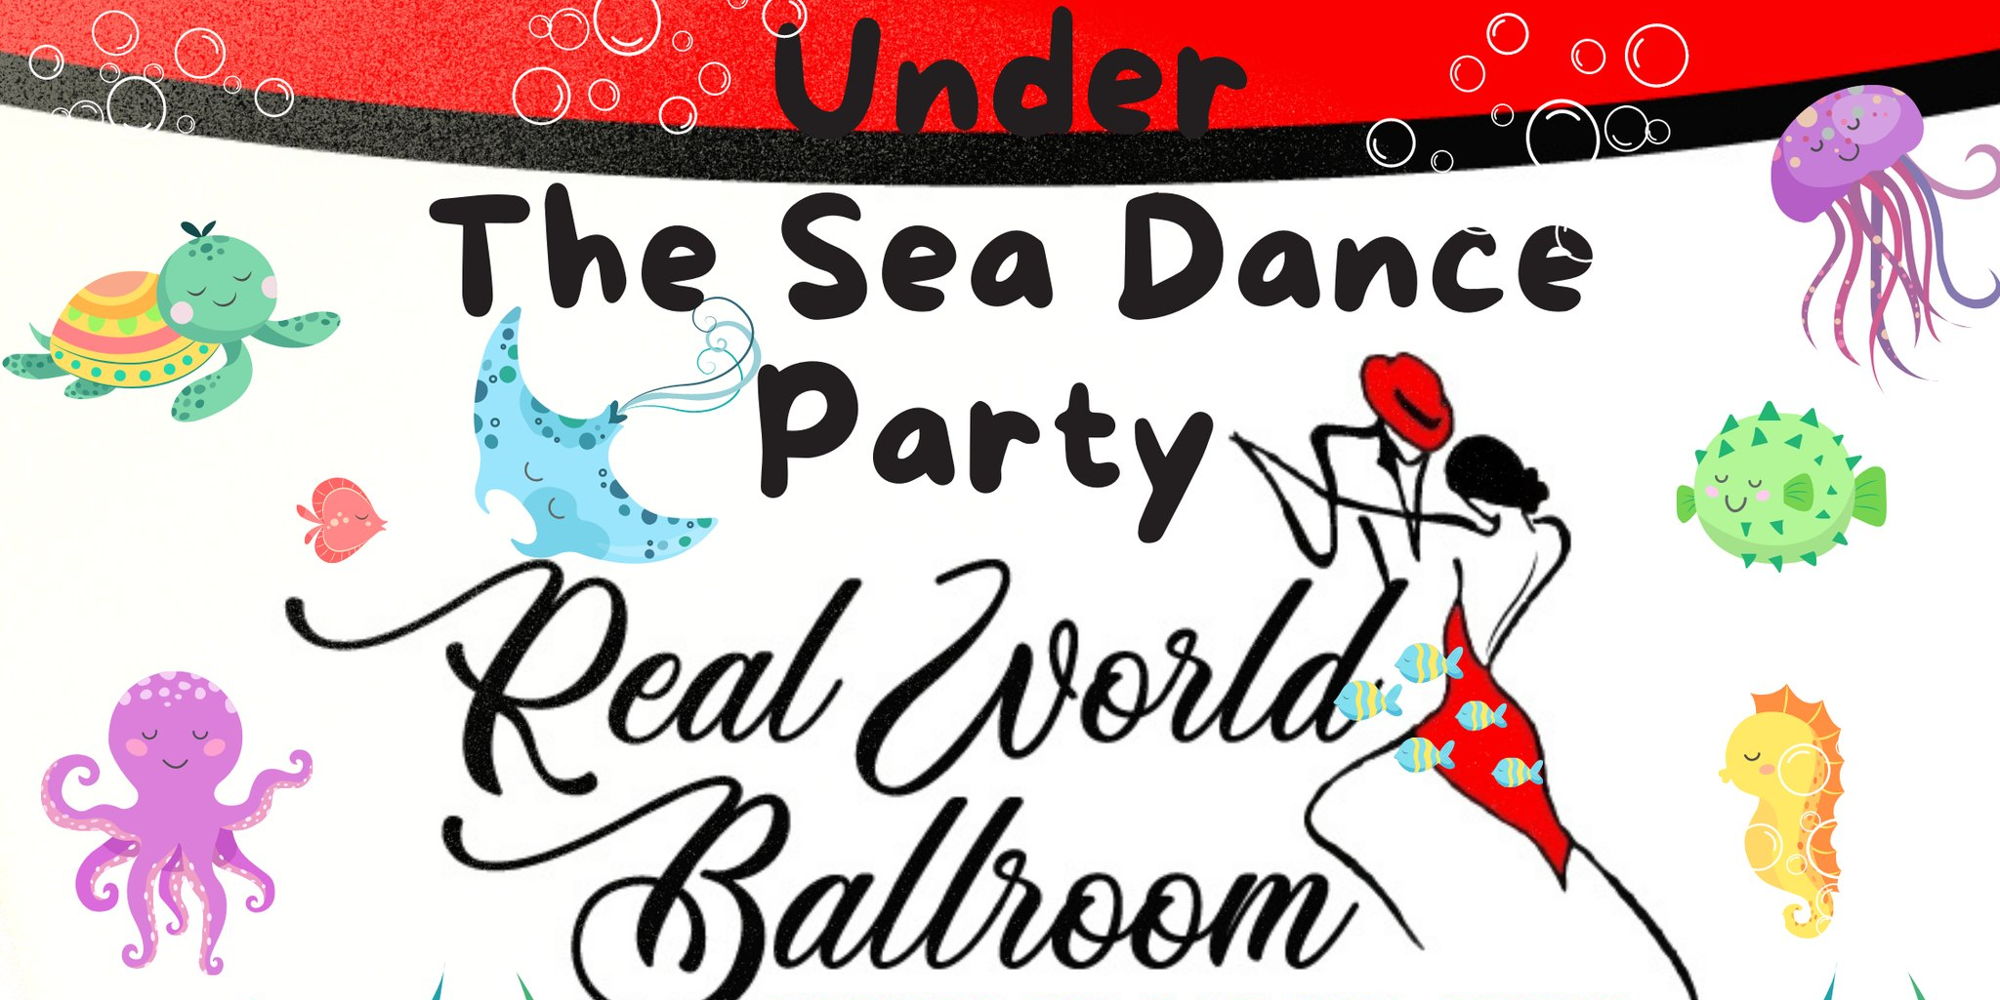 Under the Sea Social Dance Party promotional image